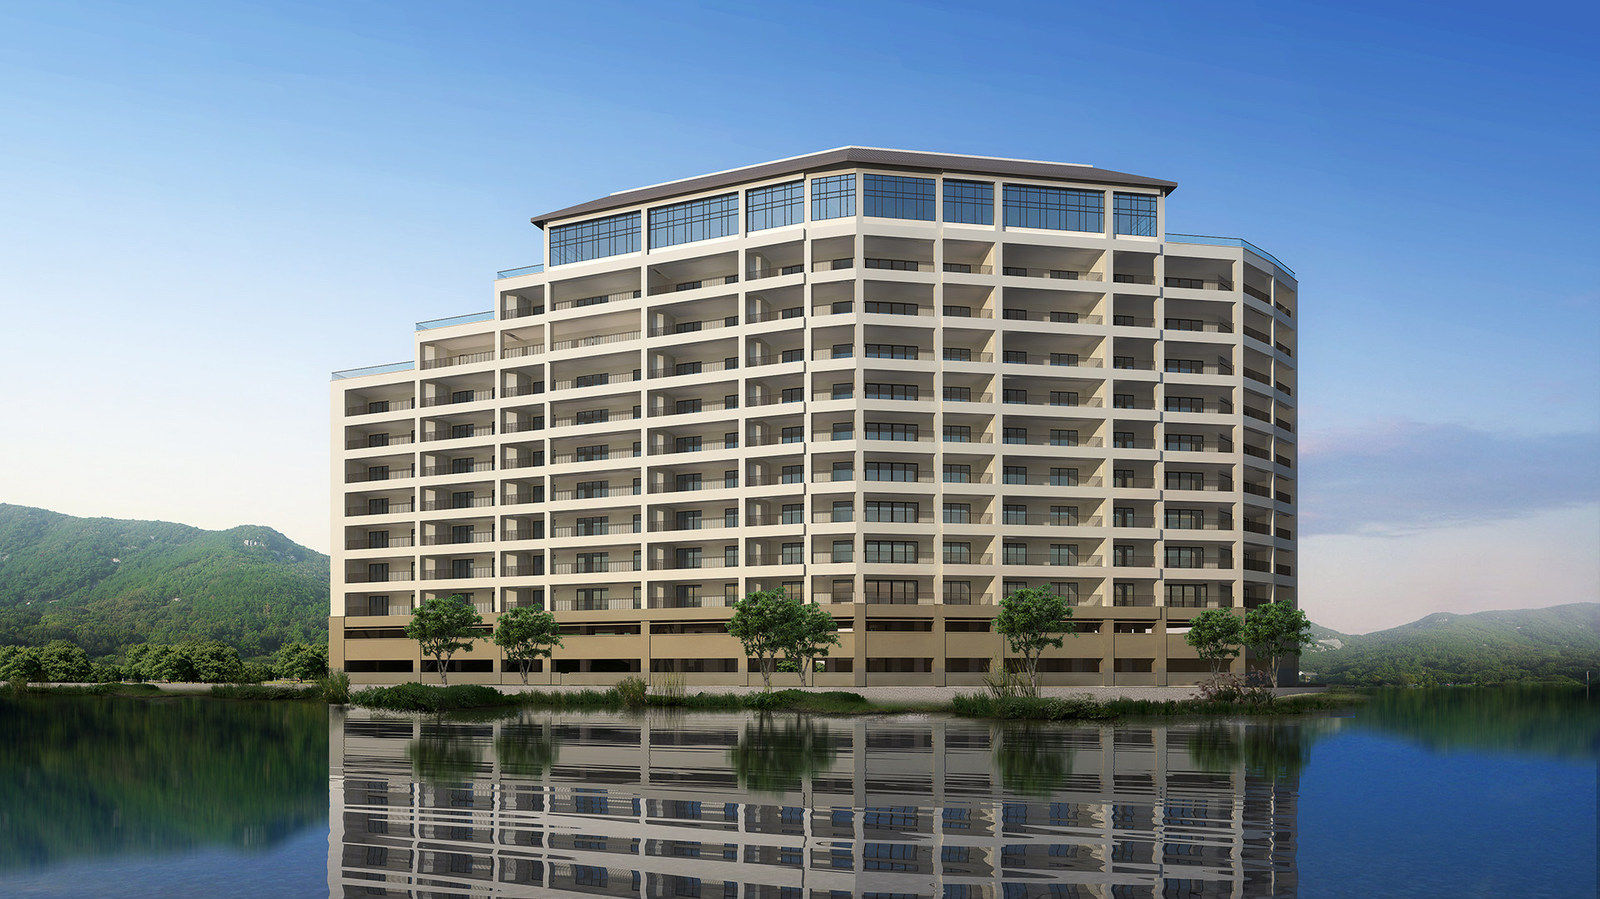 Luxury 12-Story Condo Complex At Lake Of The Ozarks Set To 